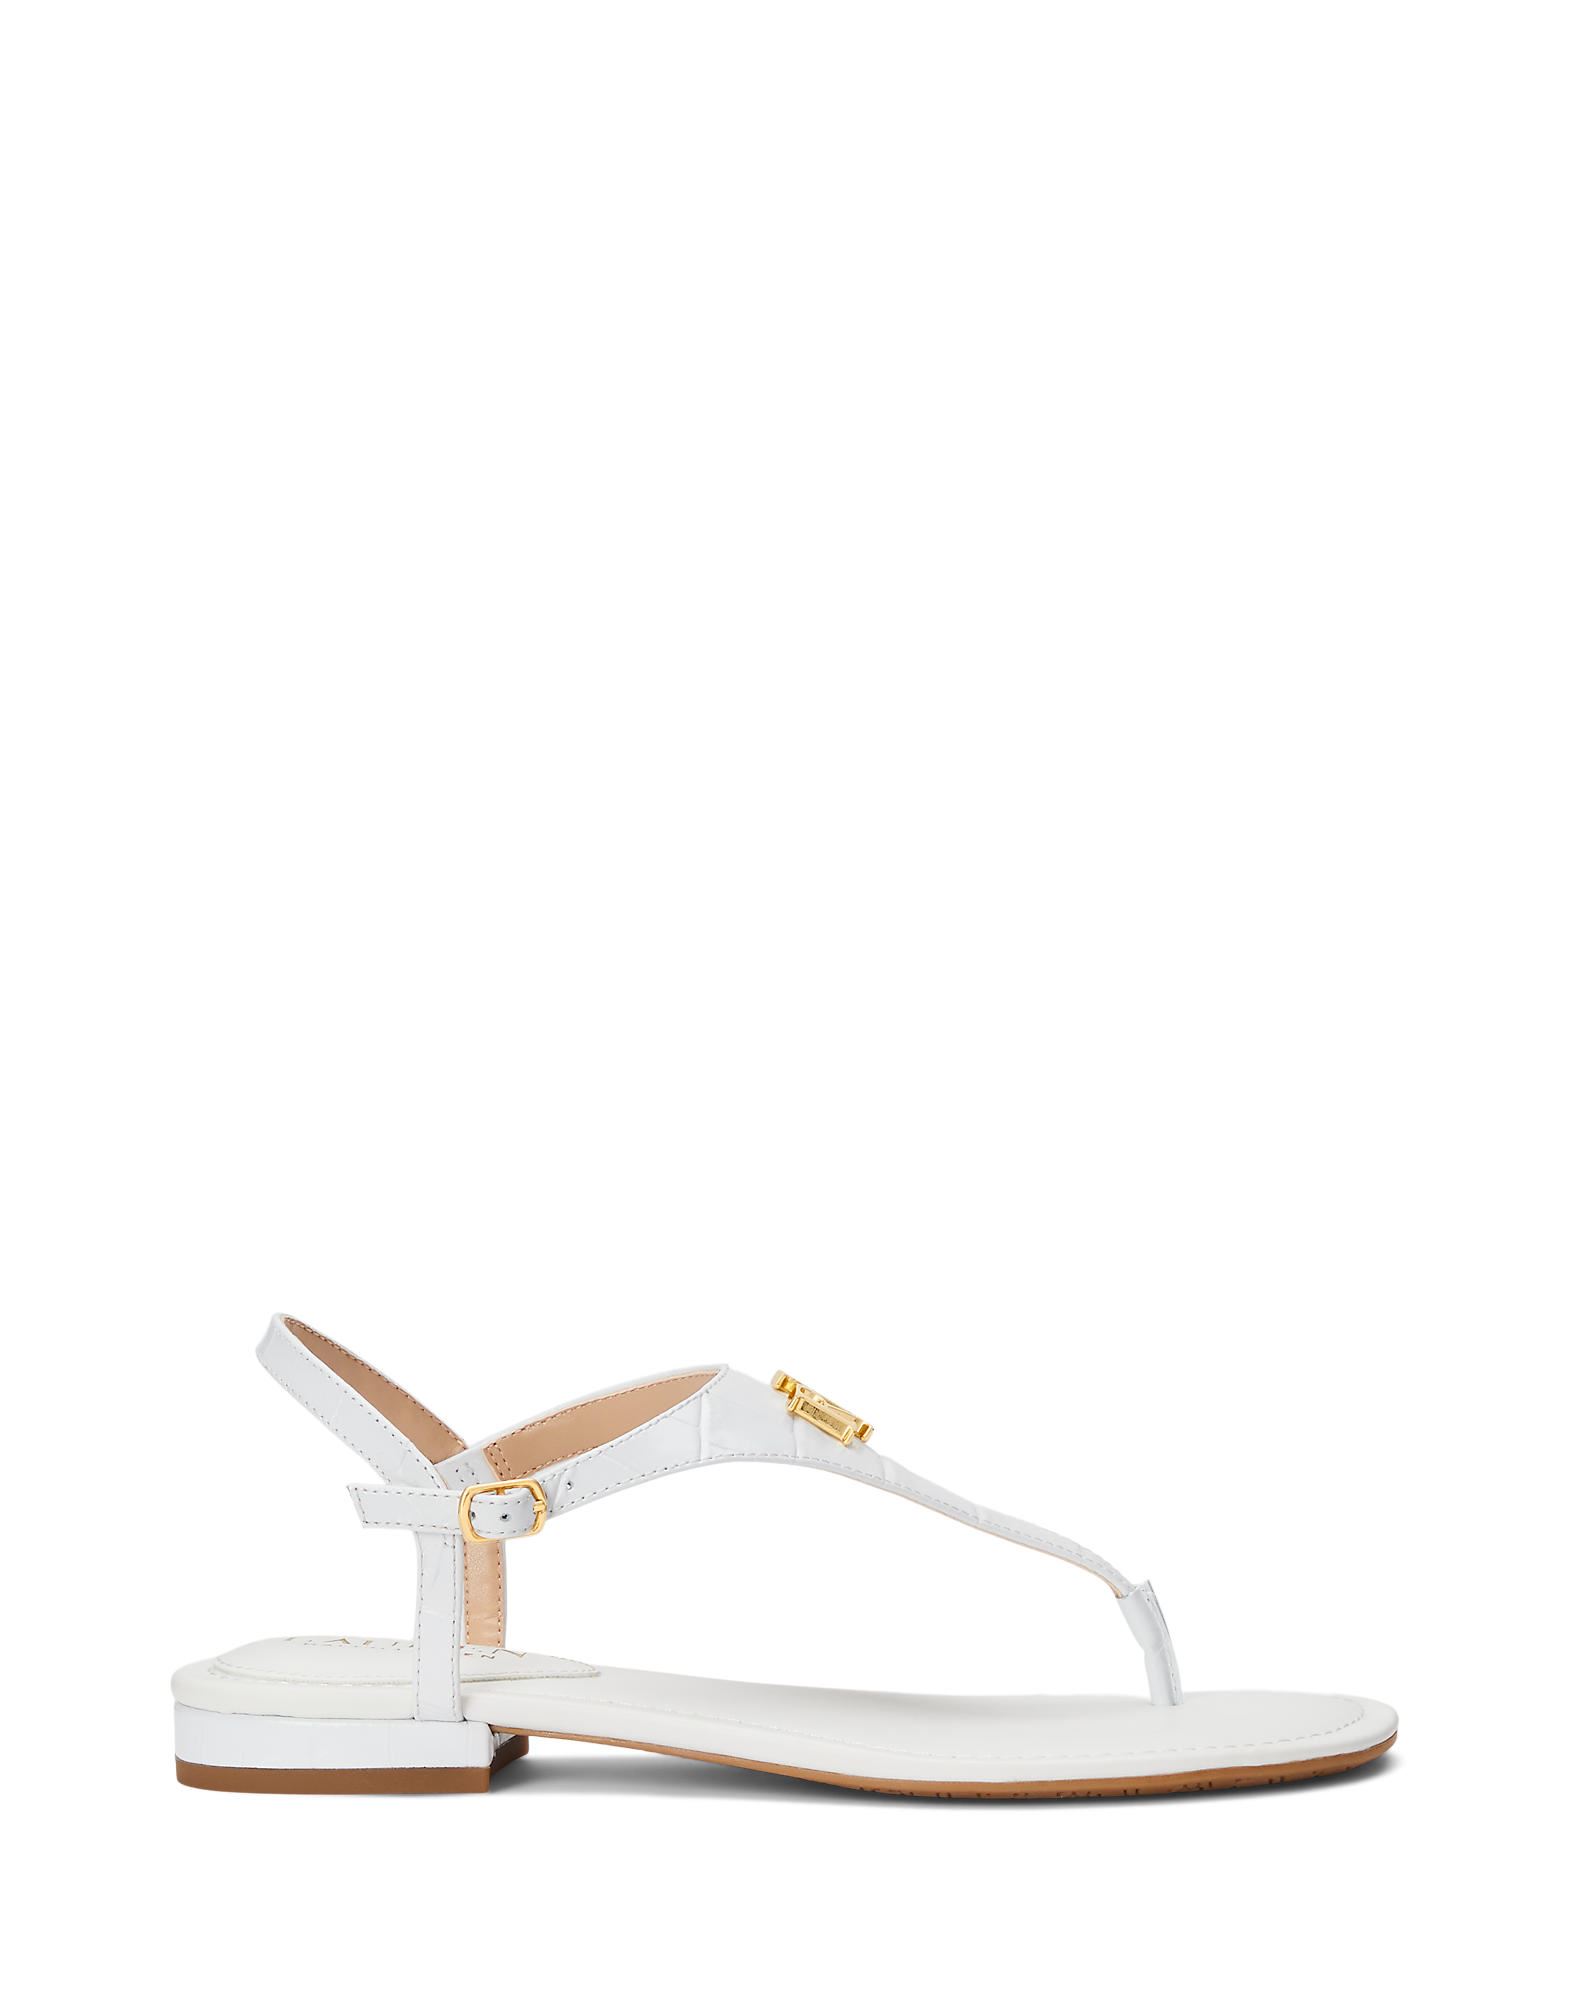 LAUREN RALPH LAUREN LAUREN RALPH LAUREN ELLINGTON EMBOSSED LEATHER SANDAL WOMAN THONG SANDAL WHITE SIZE 6.5 SOFT LEATHER